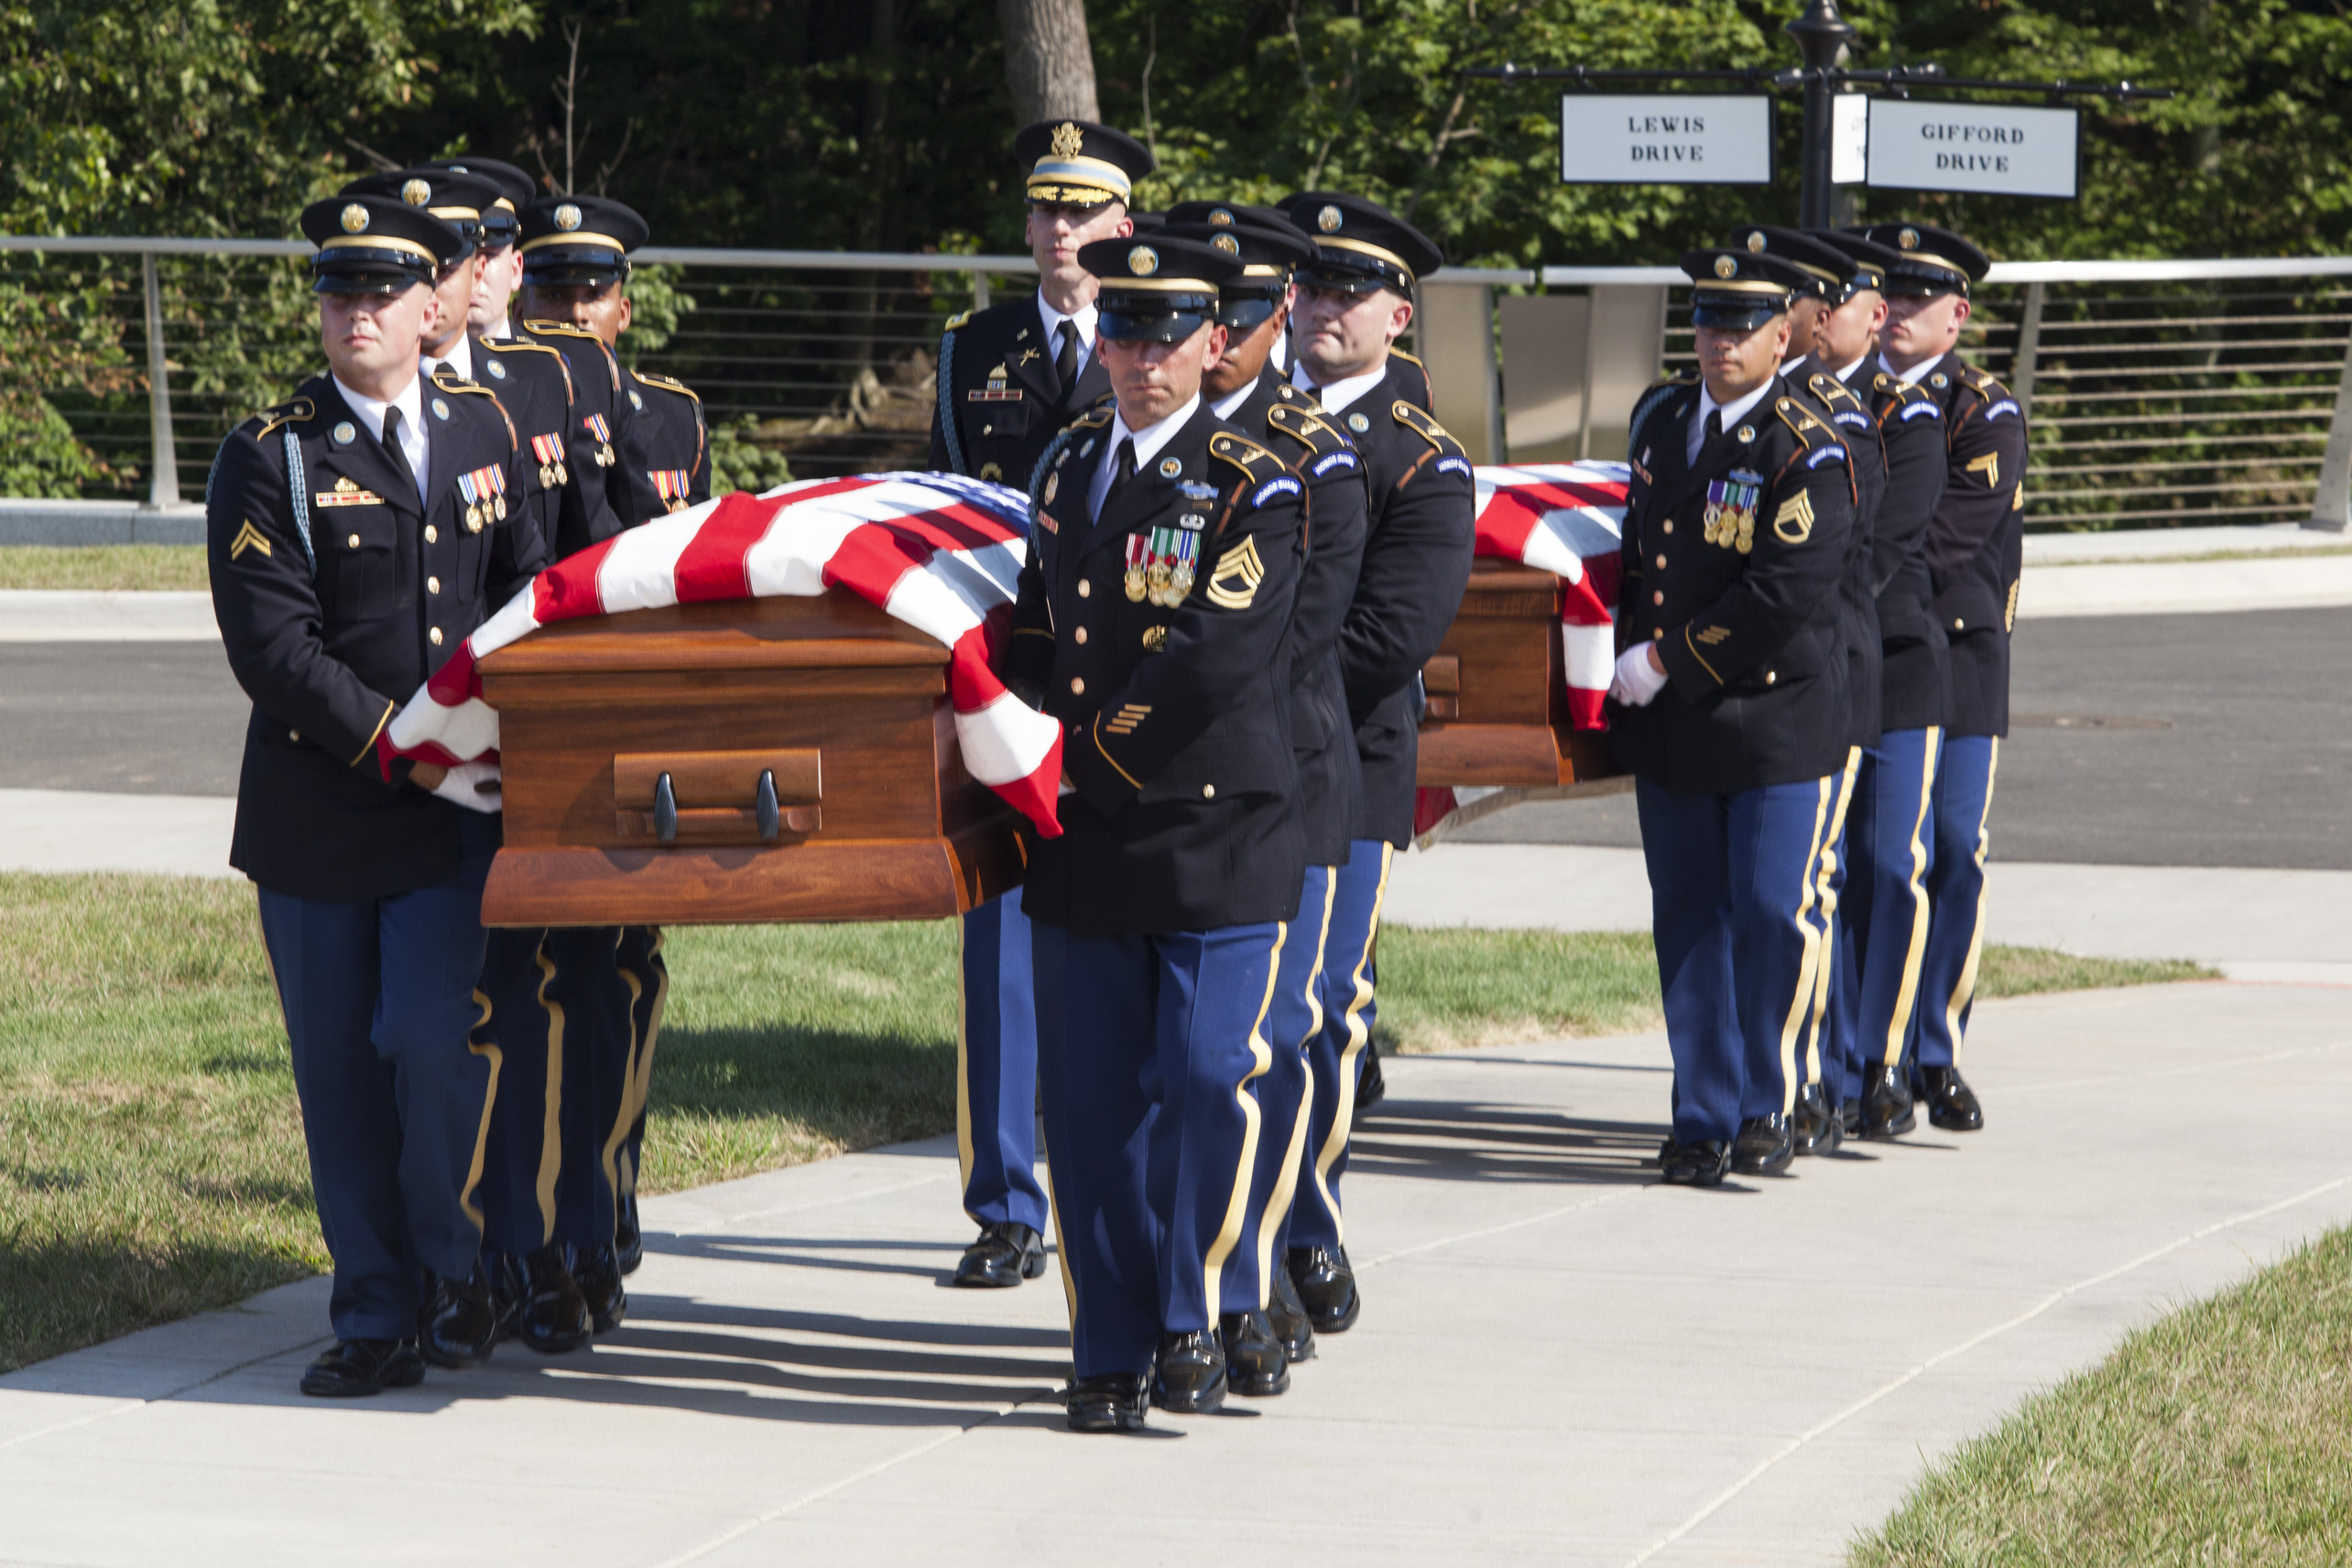 Members of the Old Guard carry two flag covered coffins towards the interment site at Arlington National Cemetery.